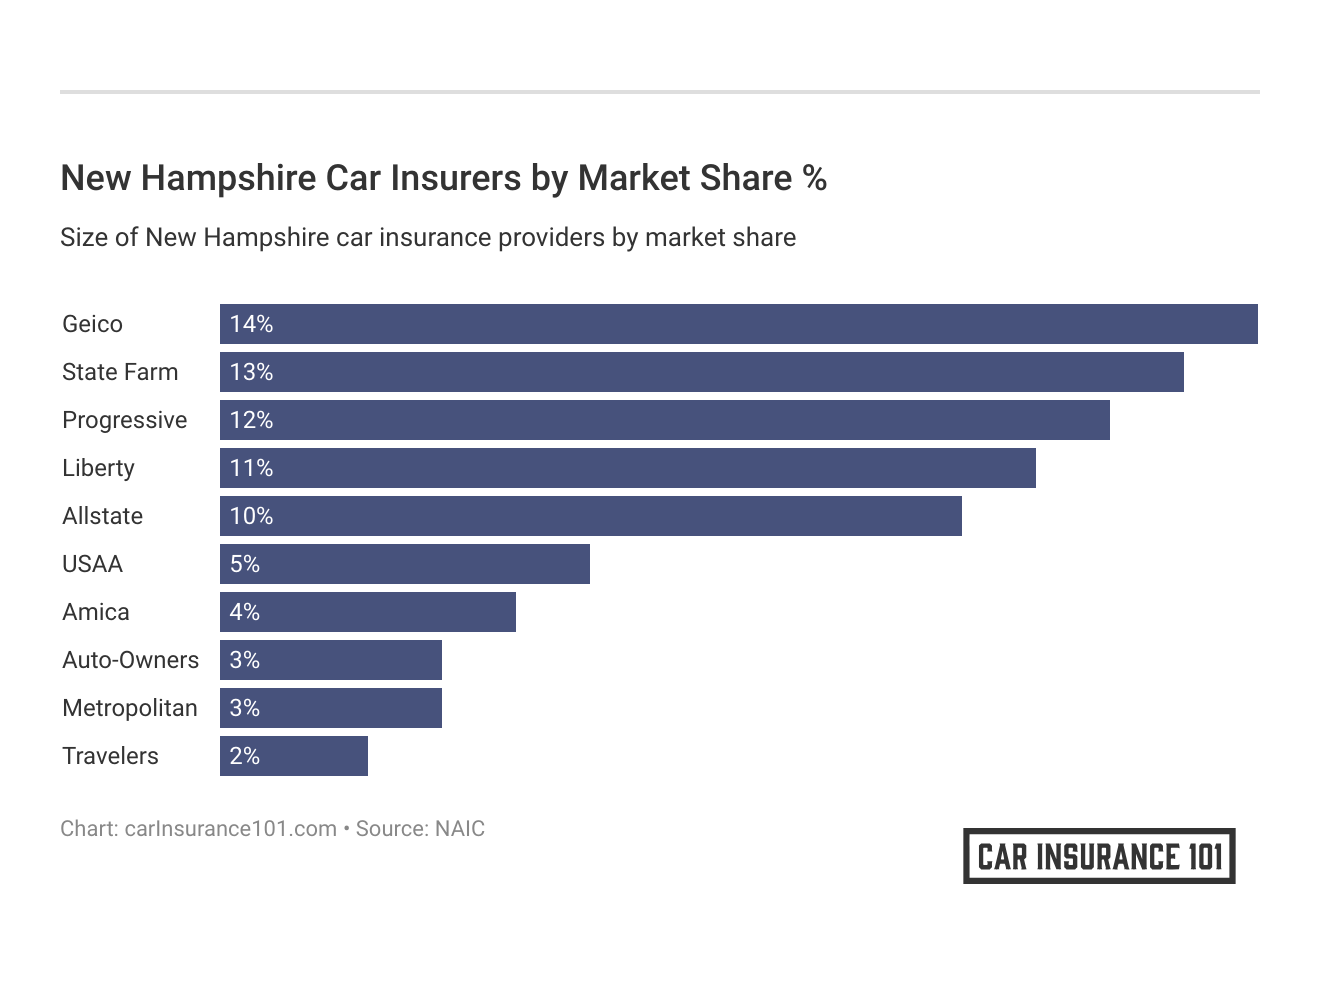 <h3>New Hampshire Car Insurers by Market Share %</h3>